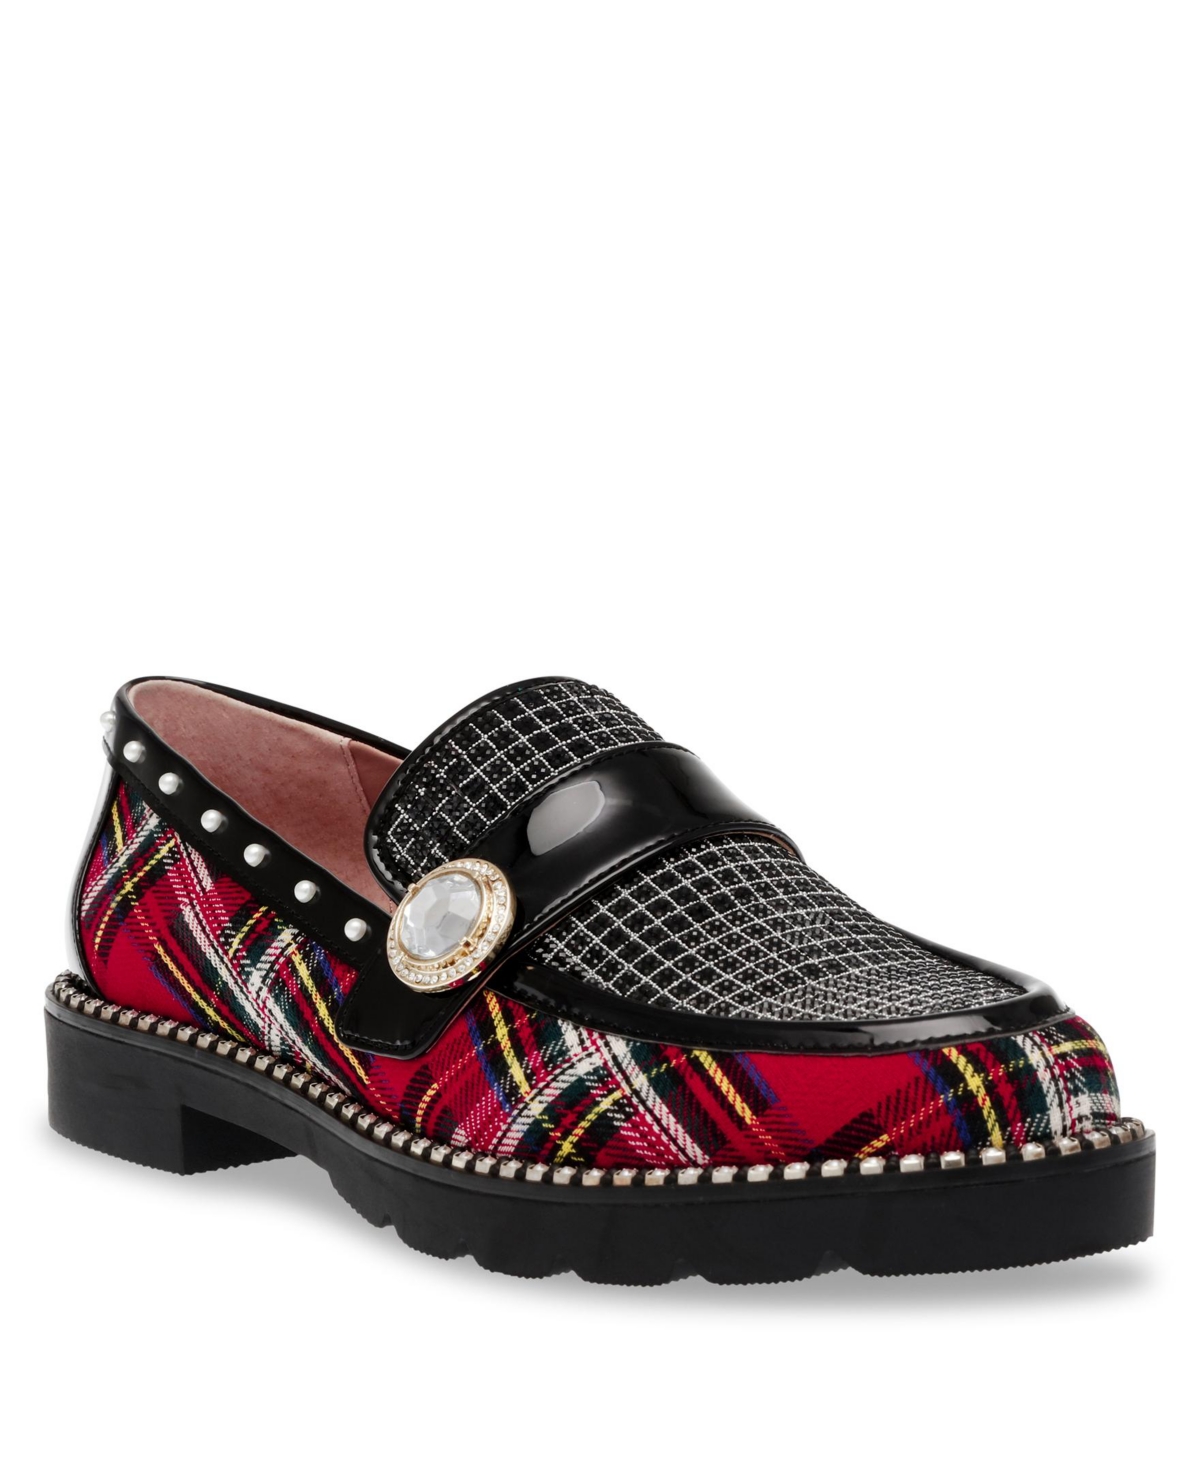 Women's Mariam Plaid and Rhinestone Embellished Loafer - Red Multi